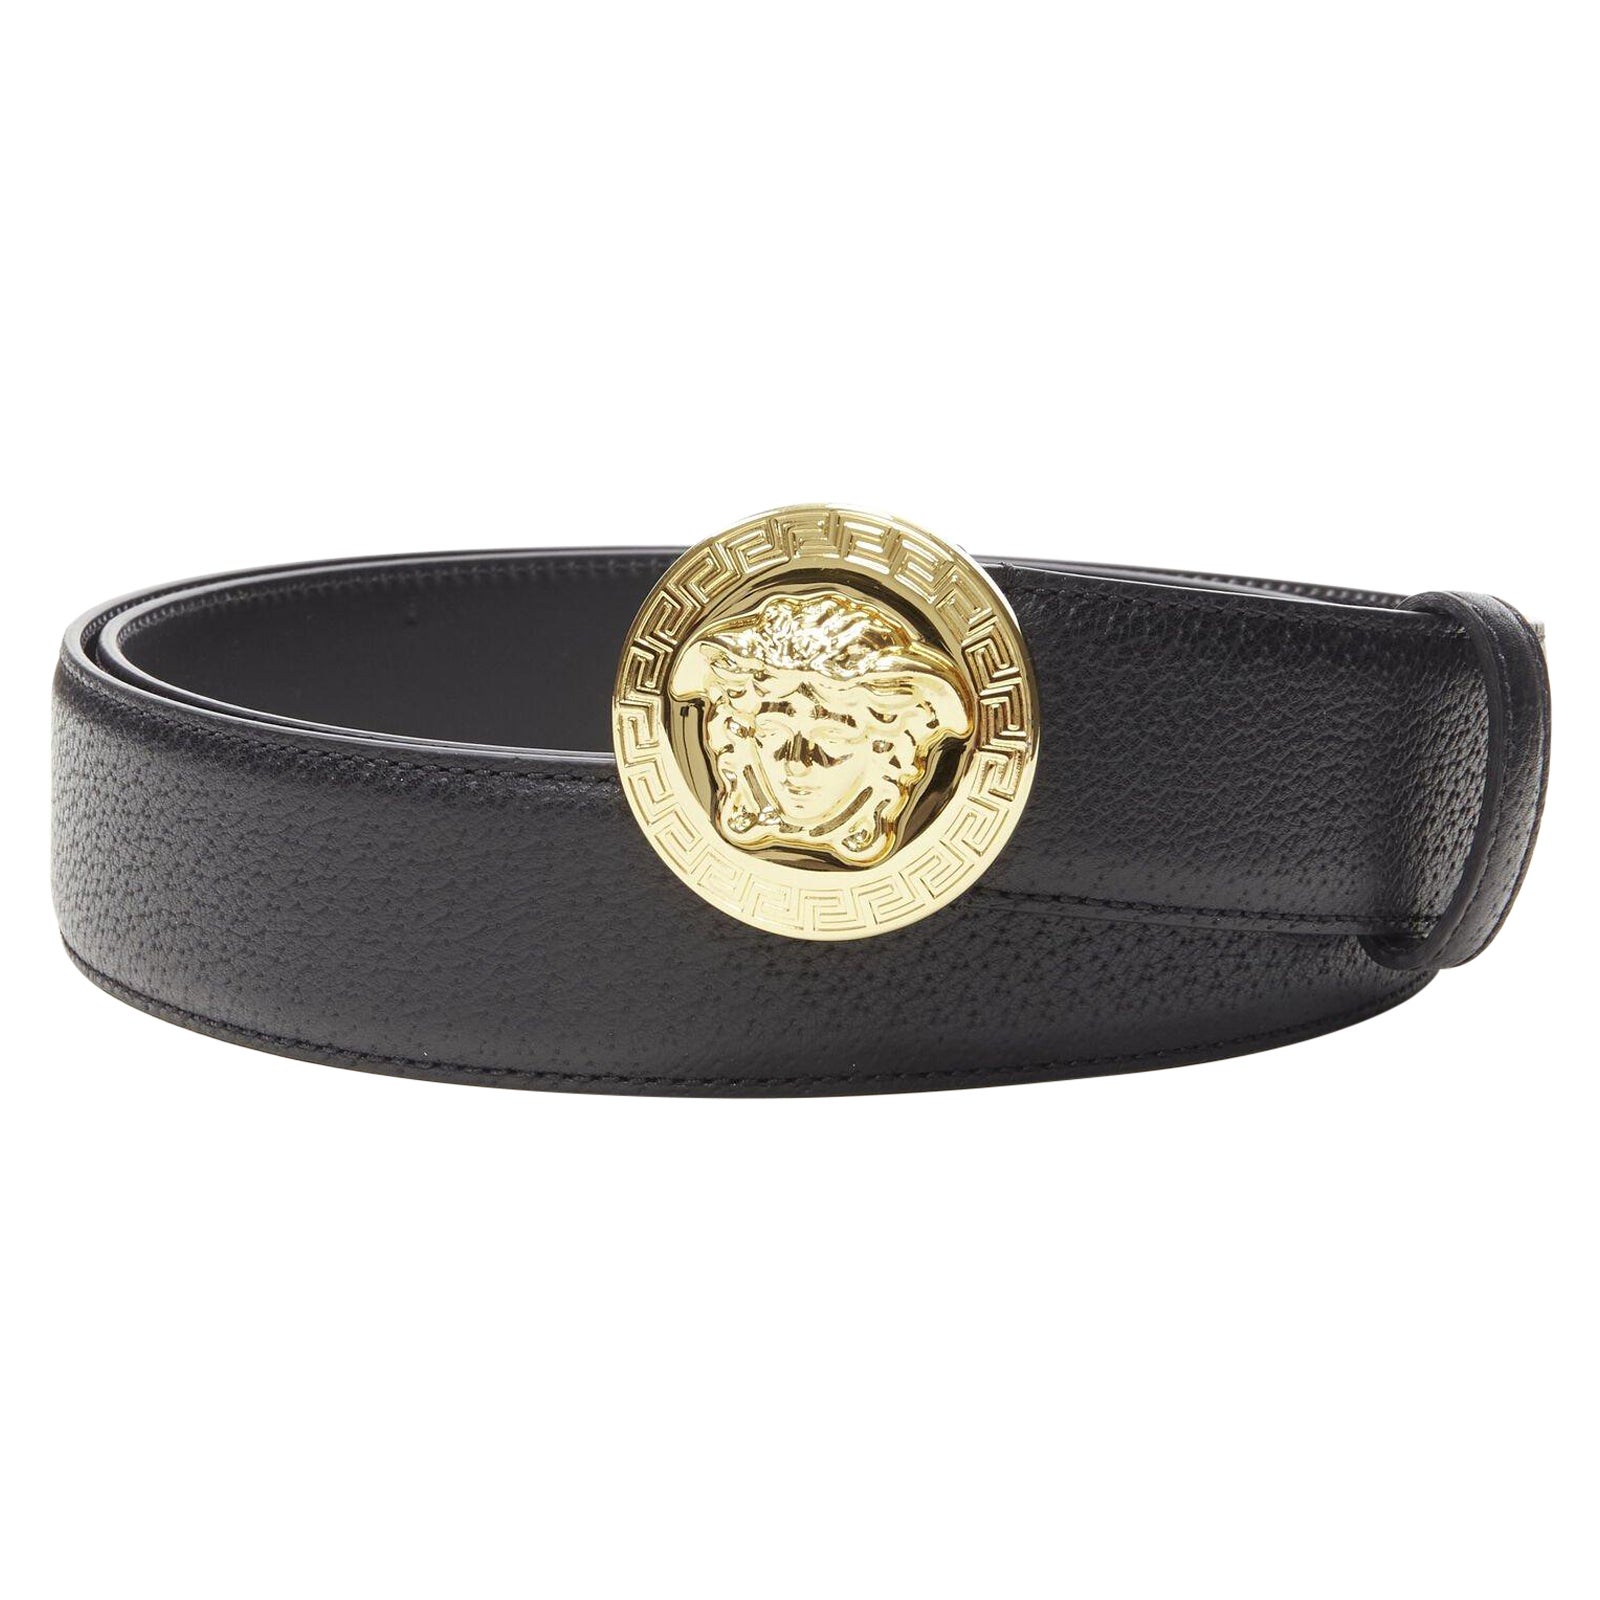 How can I resize a Versace belt?